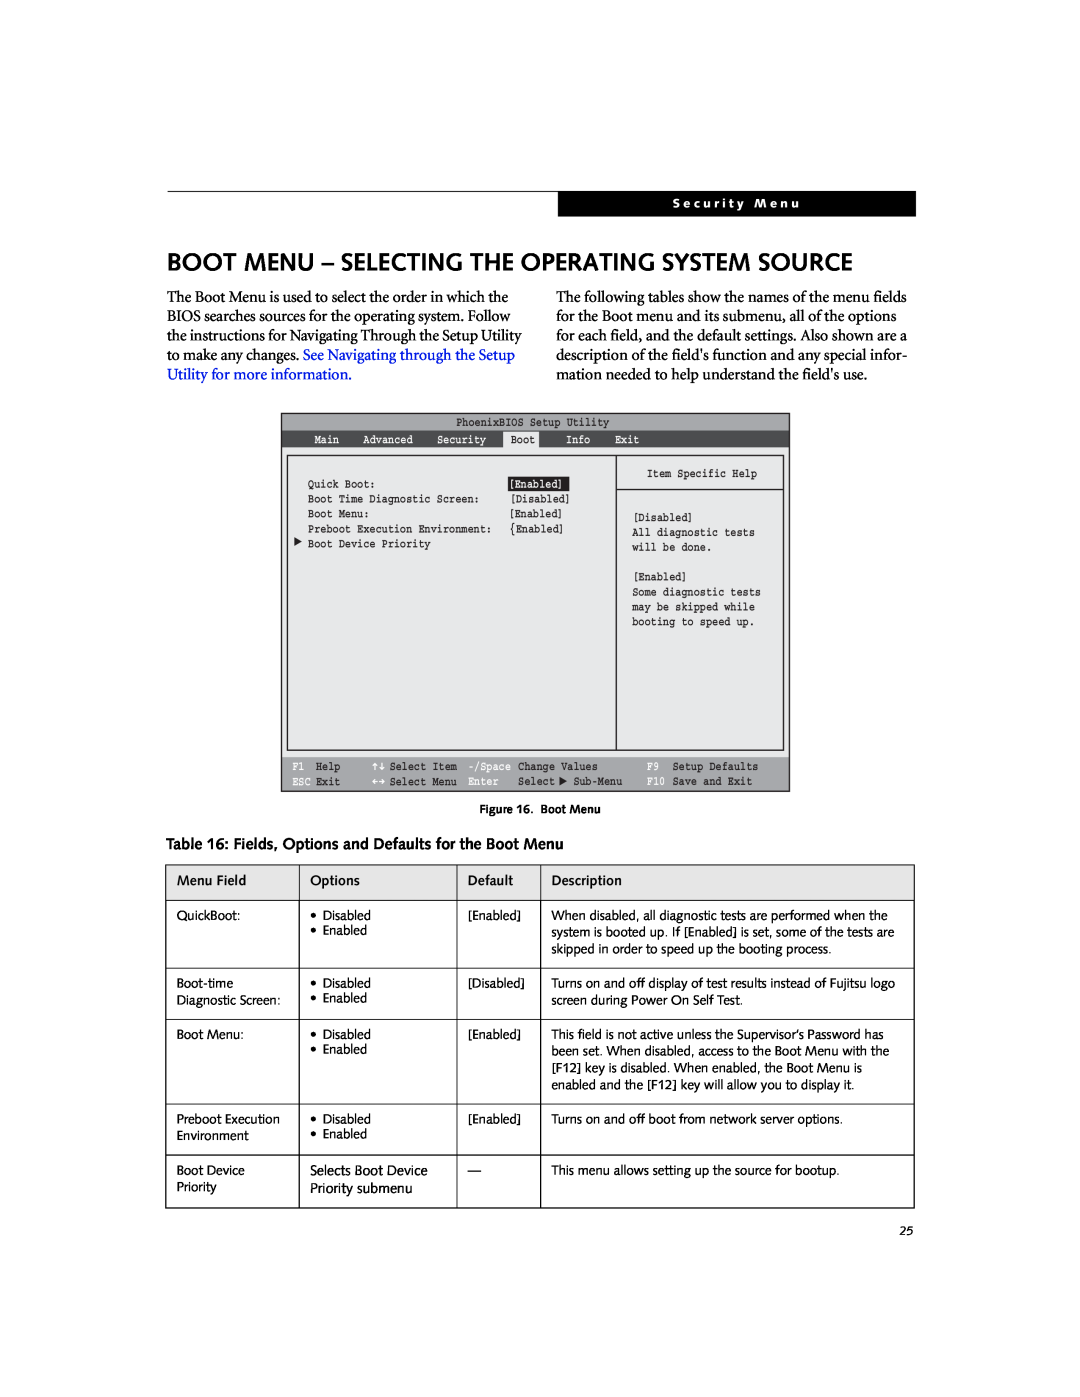 Fujitsu C1320D manual Boot Menu - Selecting The Operating System Source, Fields, Options and Defaults for the Boot Menu 